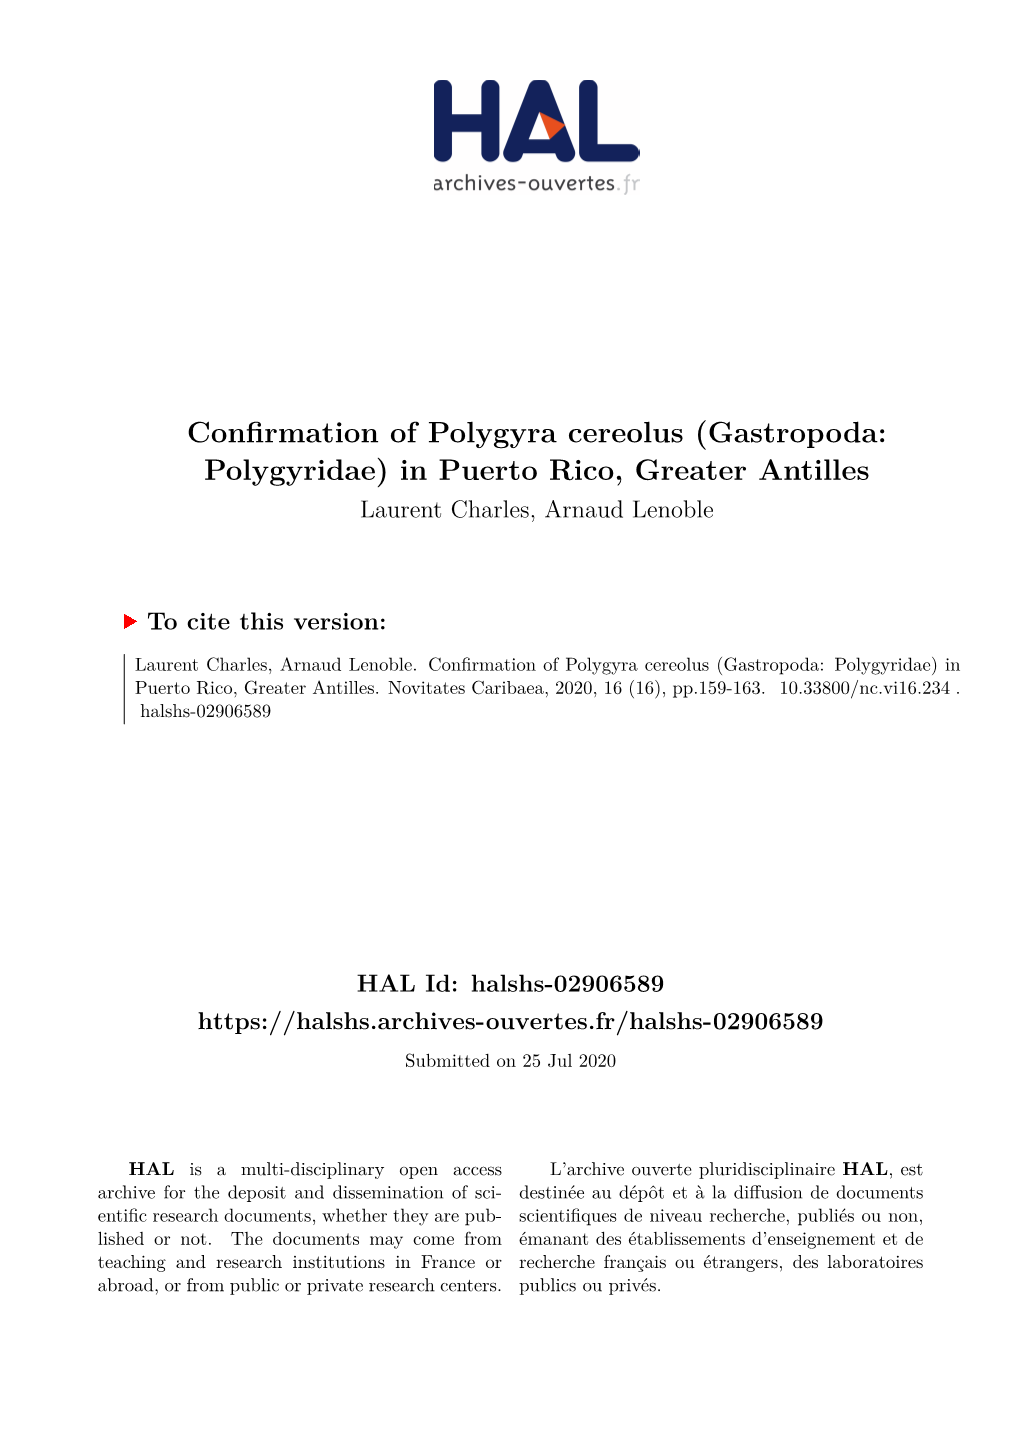 Confirmation of Polygyra Cereolus (Gastropoda: Polygyridae) in Puerto Rico, Greater Antilles Laurent Charles, Arnaud Lenoble